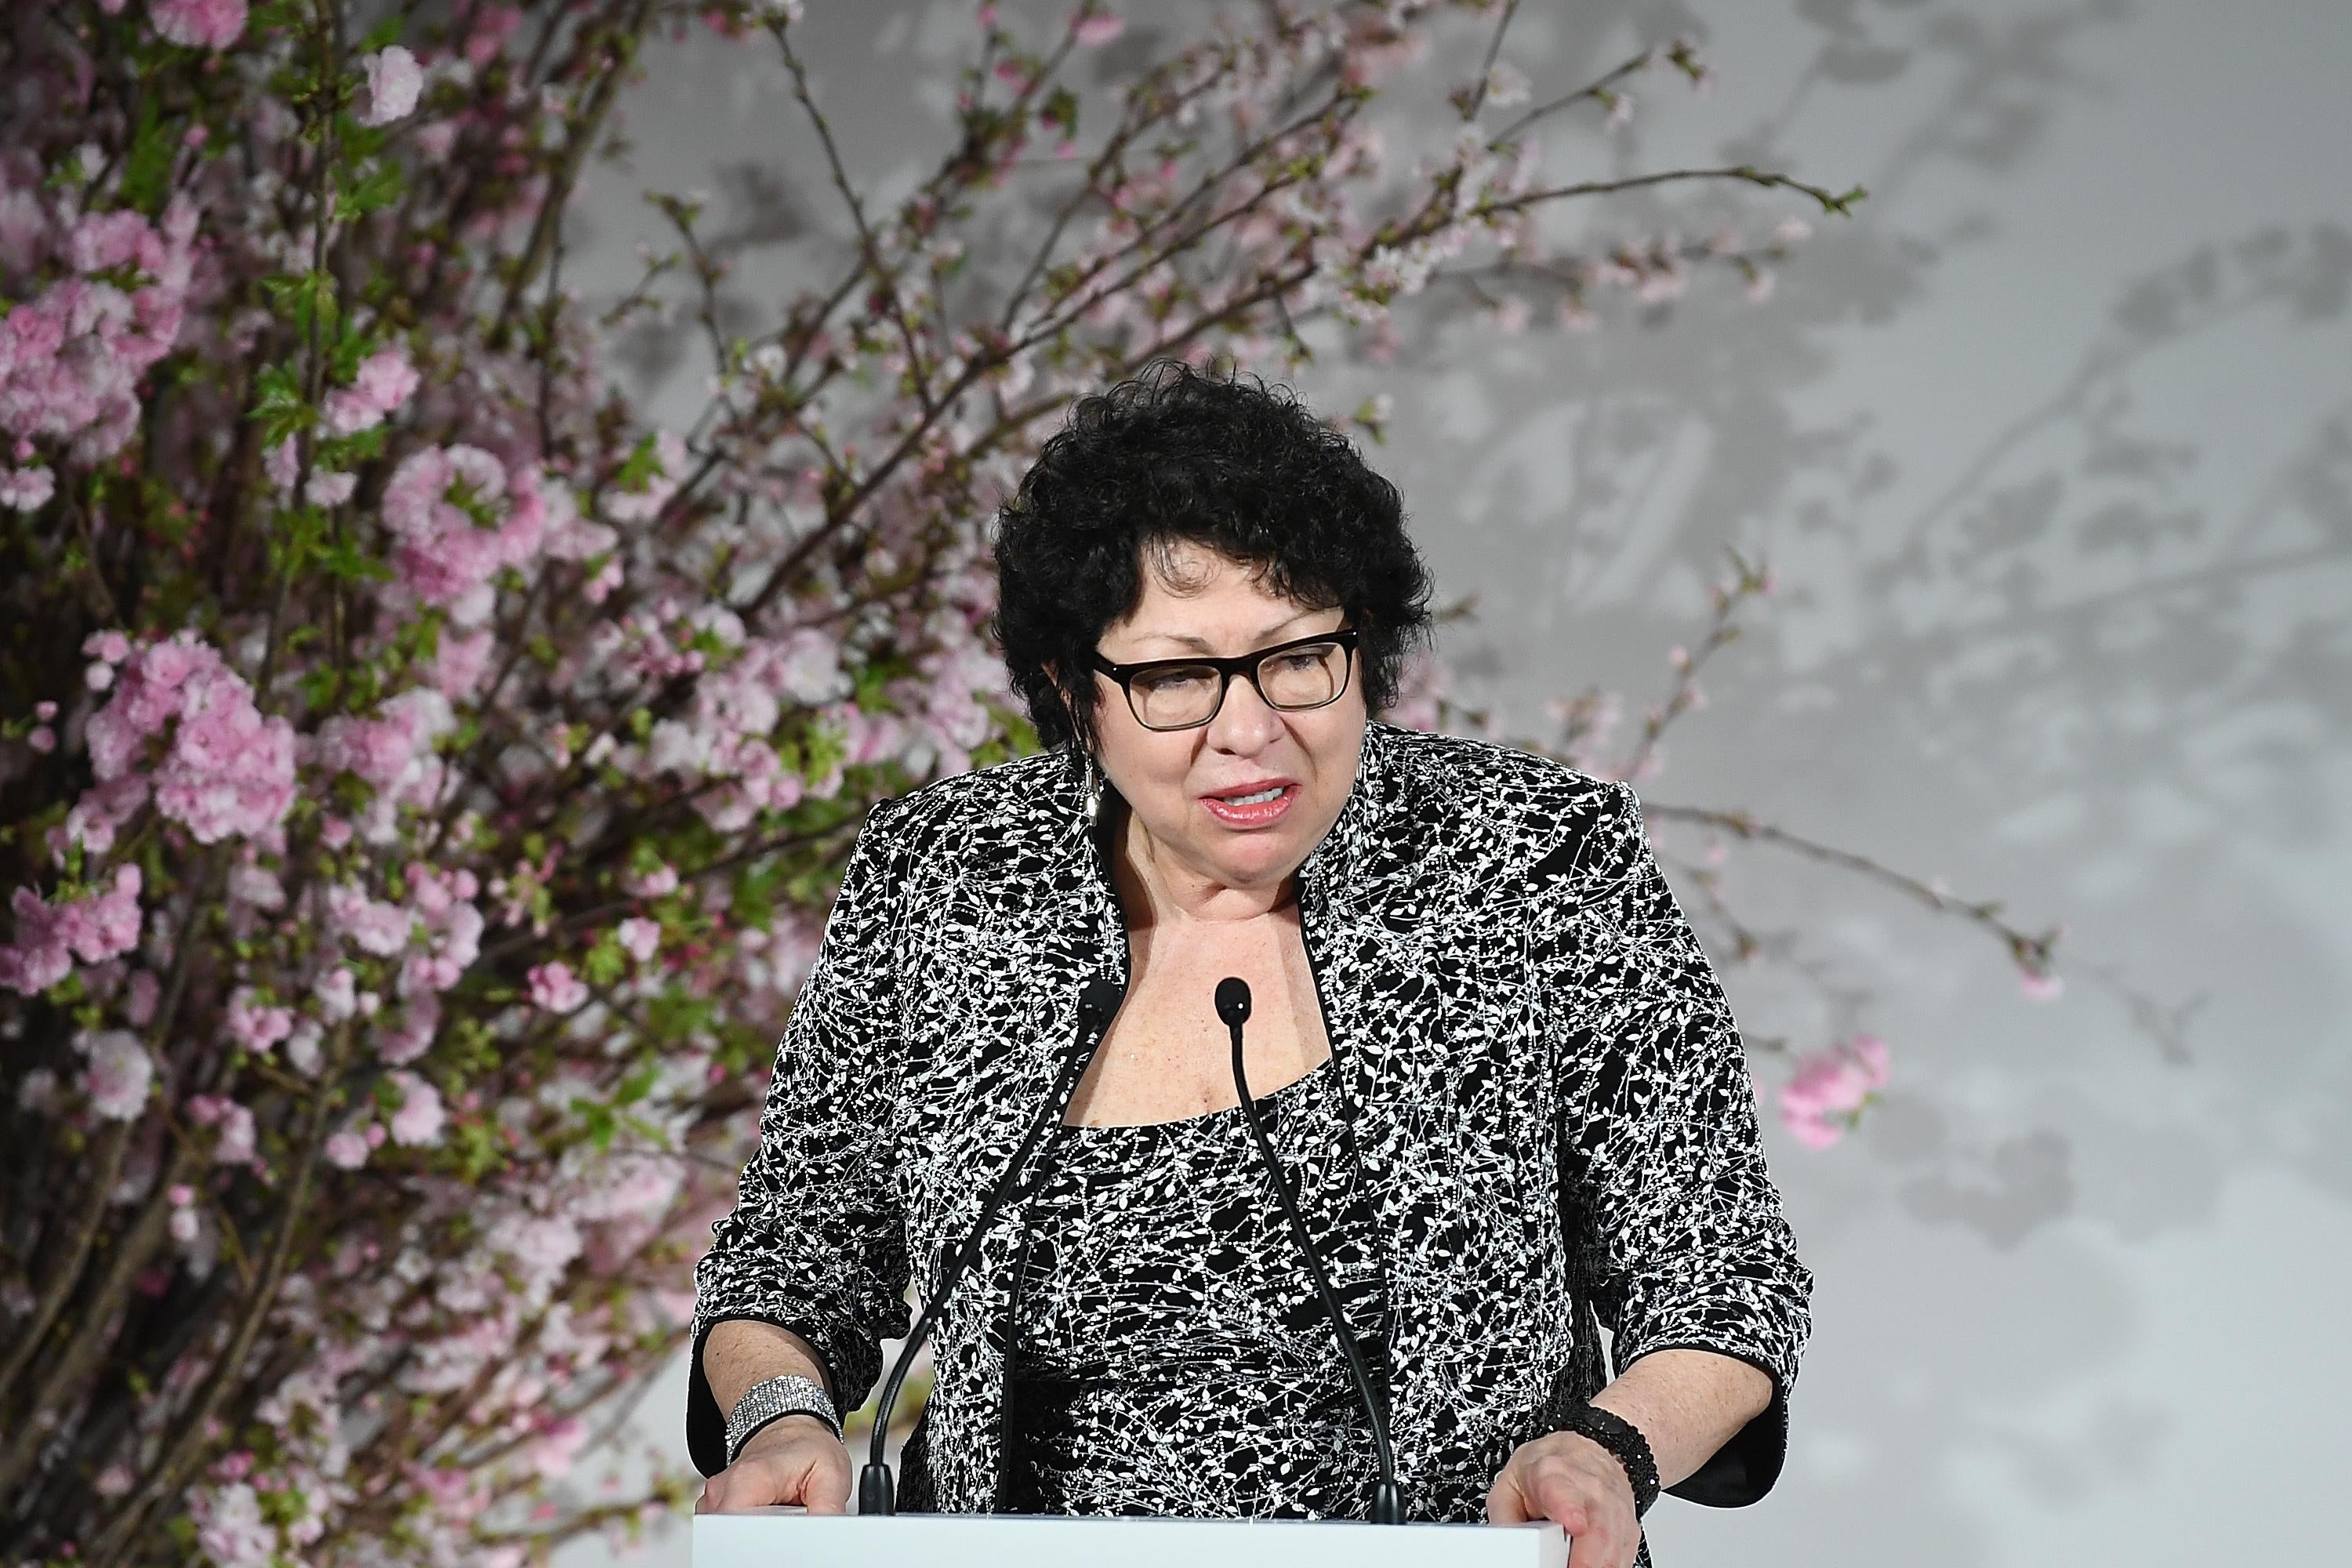 Sonia Sotomayor stands at a lectern and speaks into a microphone.